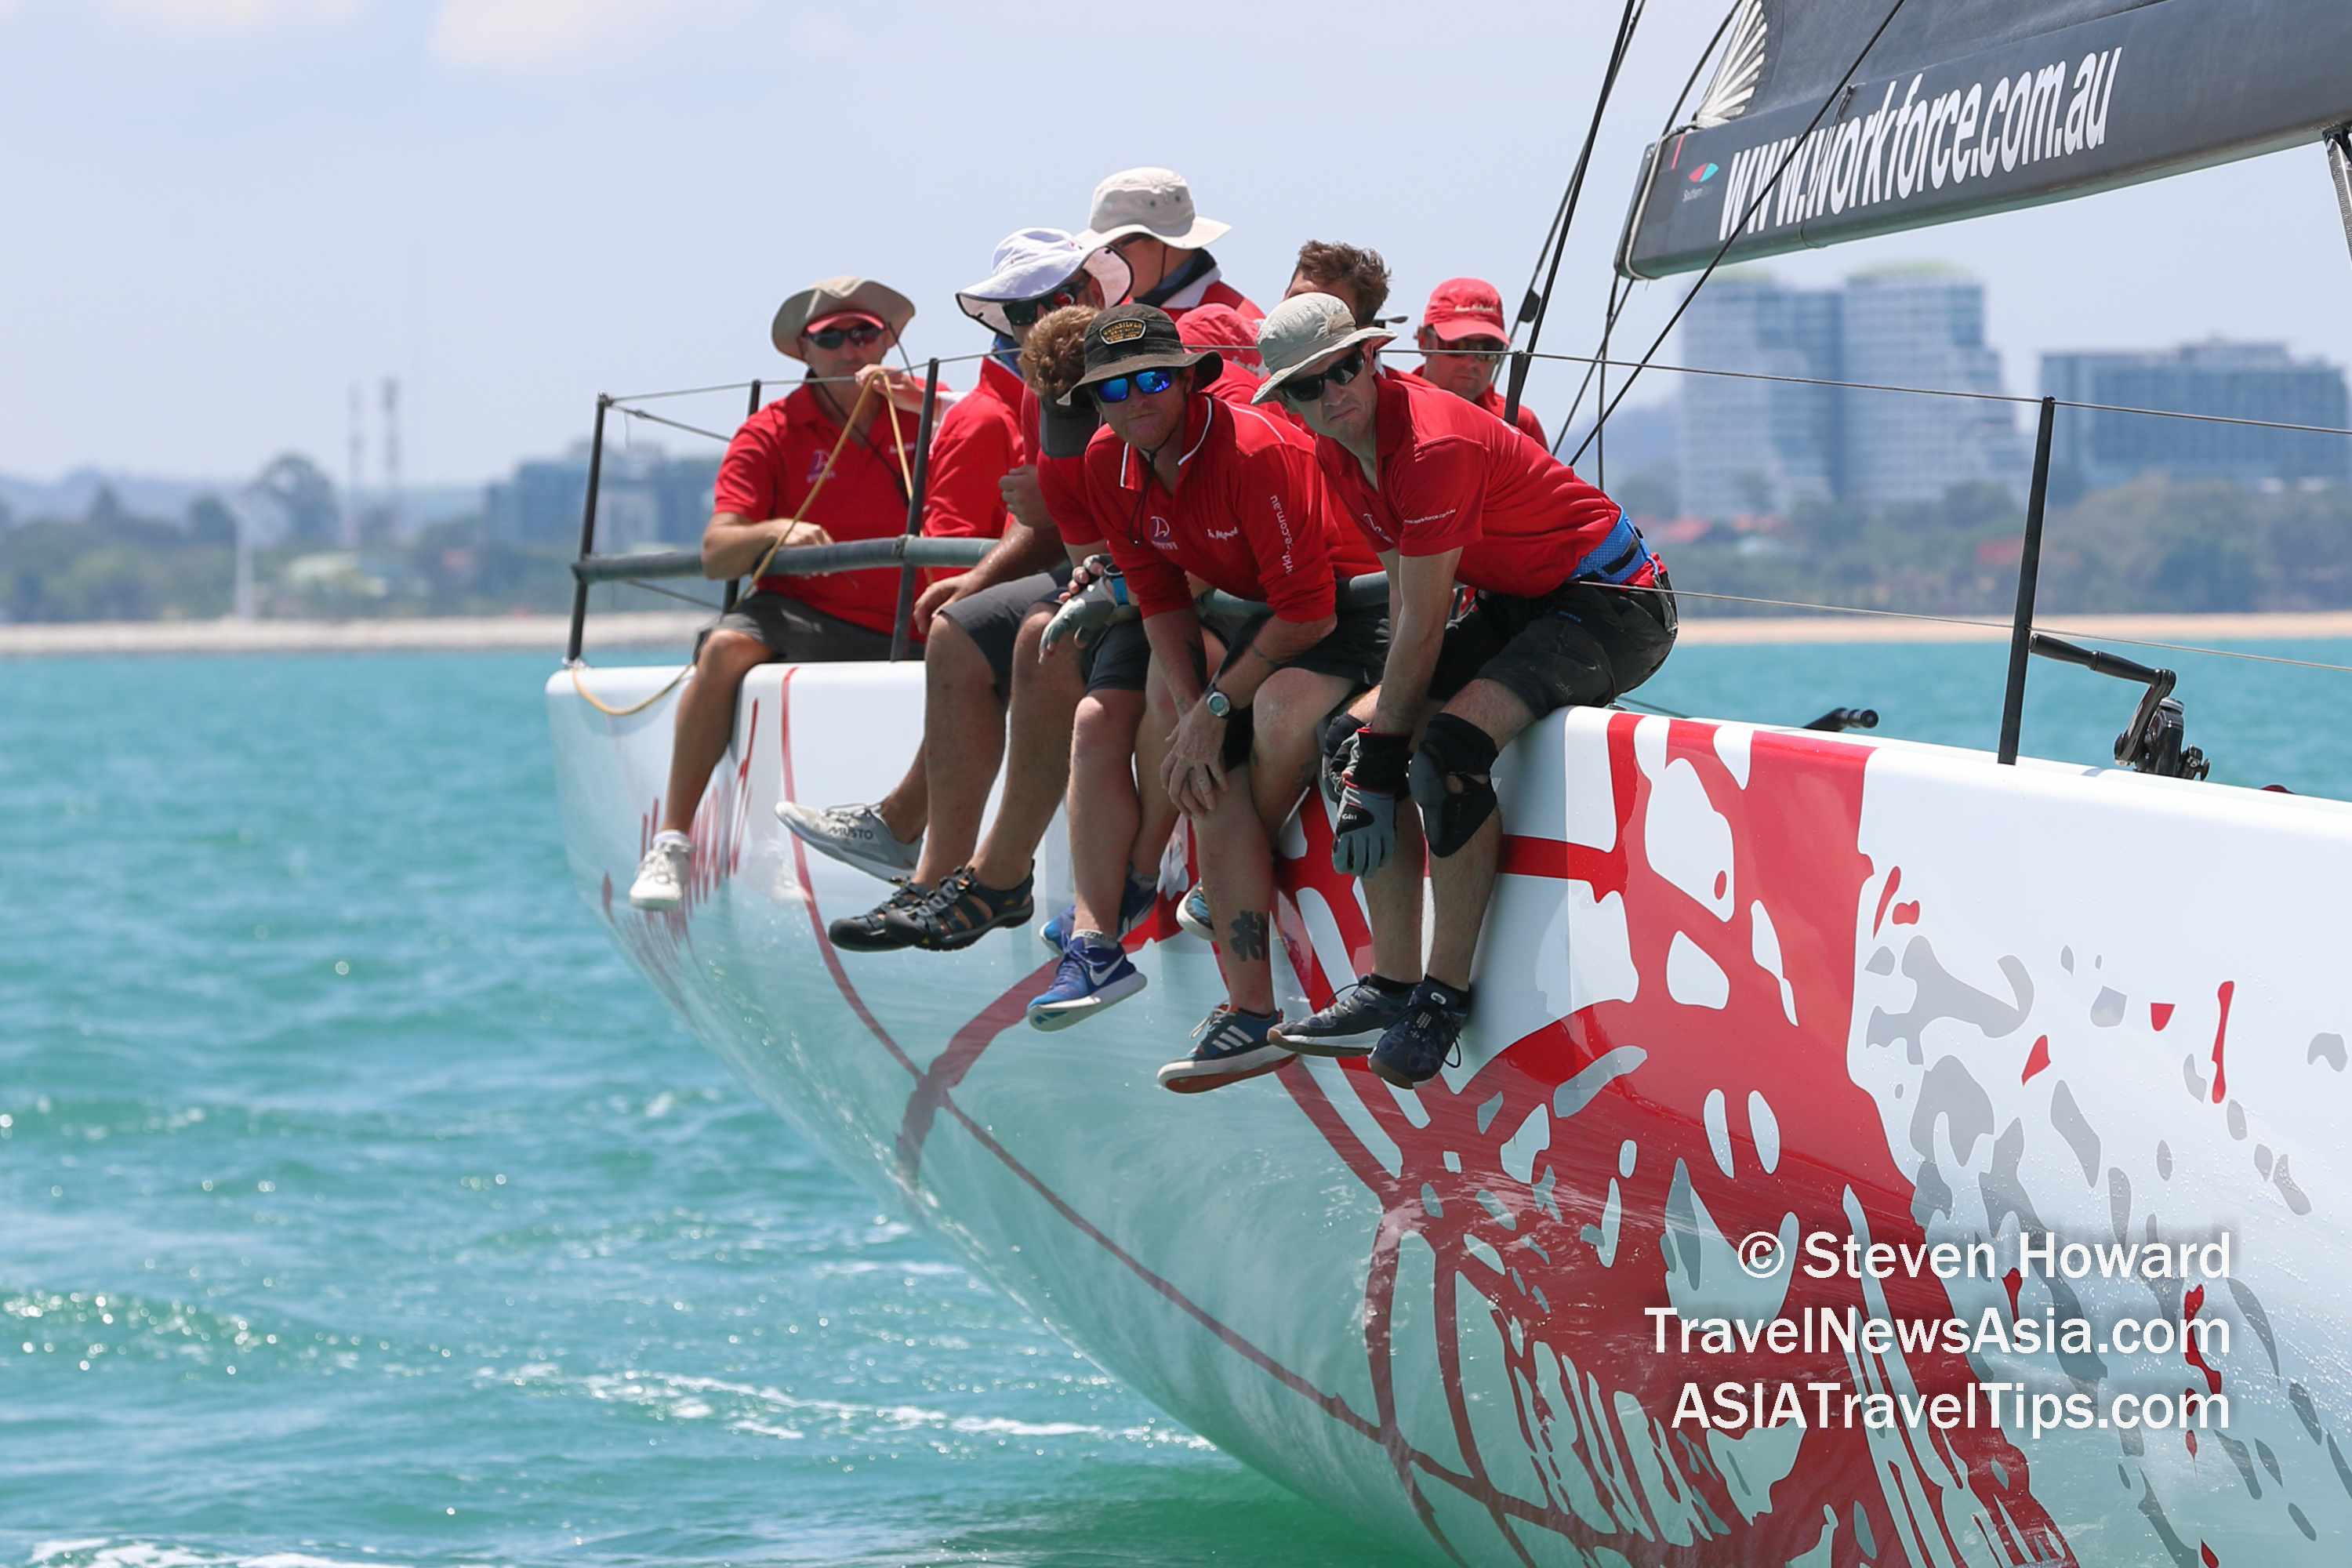 Team Hollywood take the early lead in IRC Racing 1 - Top of the Gulf Regatta in Pattaya, Thailand. Picture by Steven Howard of TravelNewsAsia.com Click to enlarge.